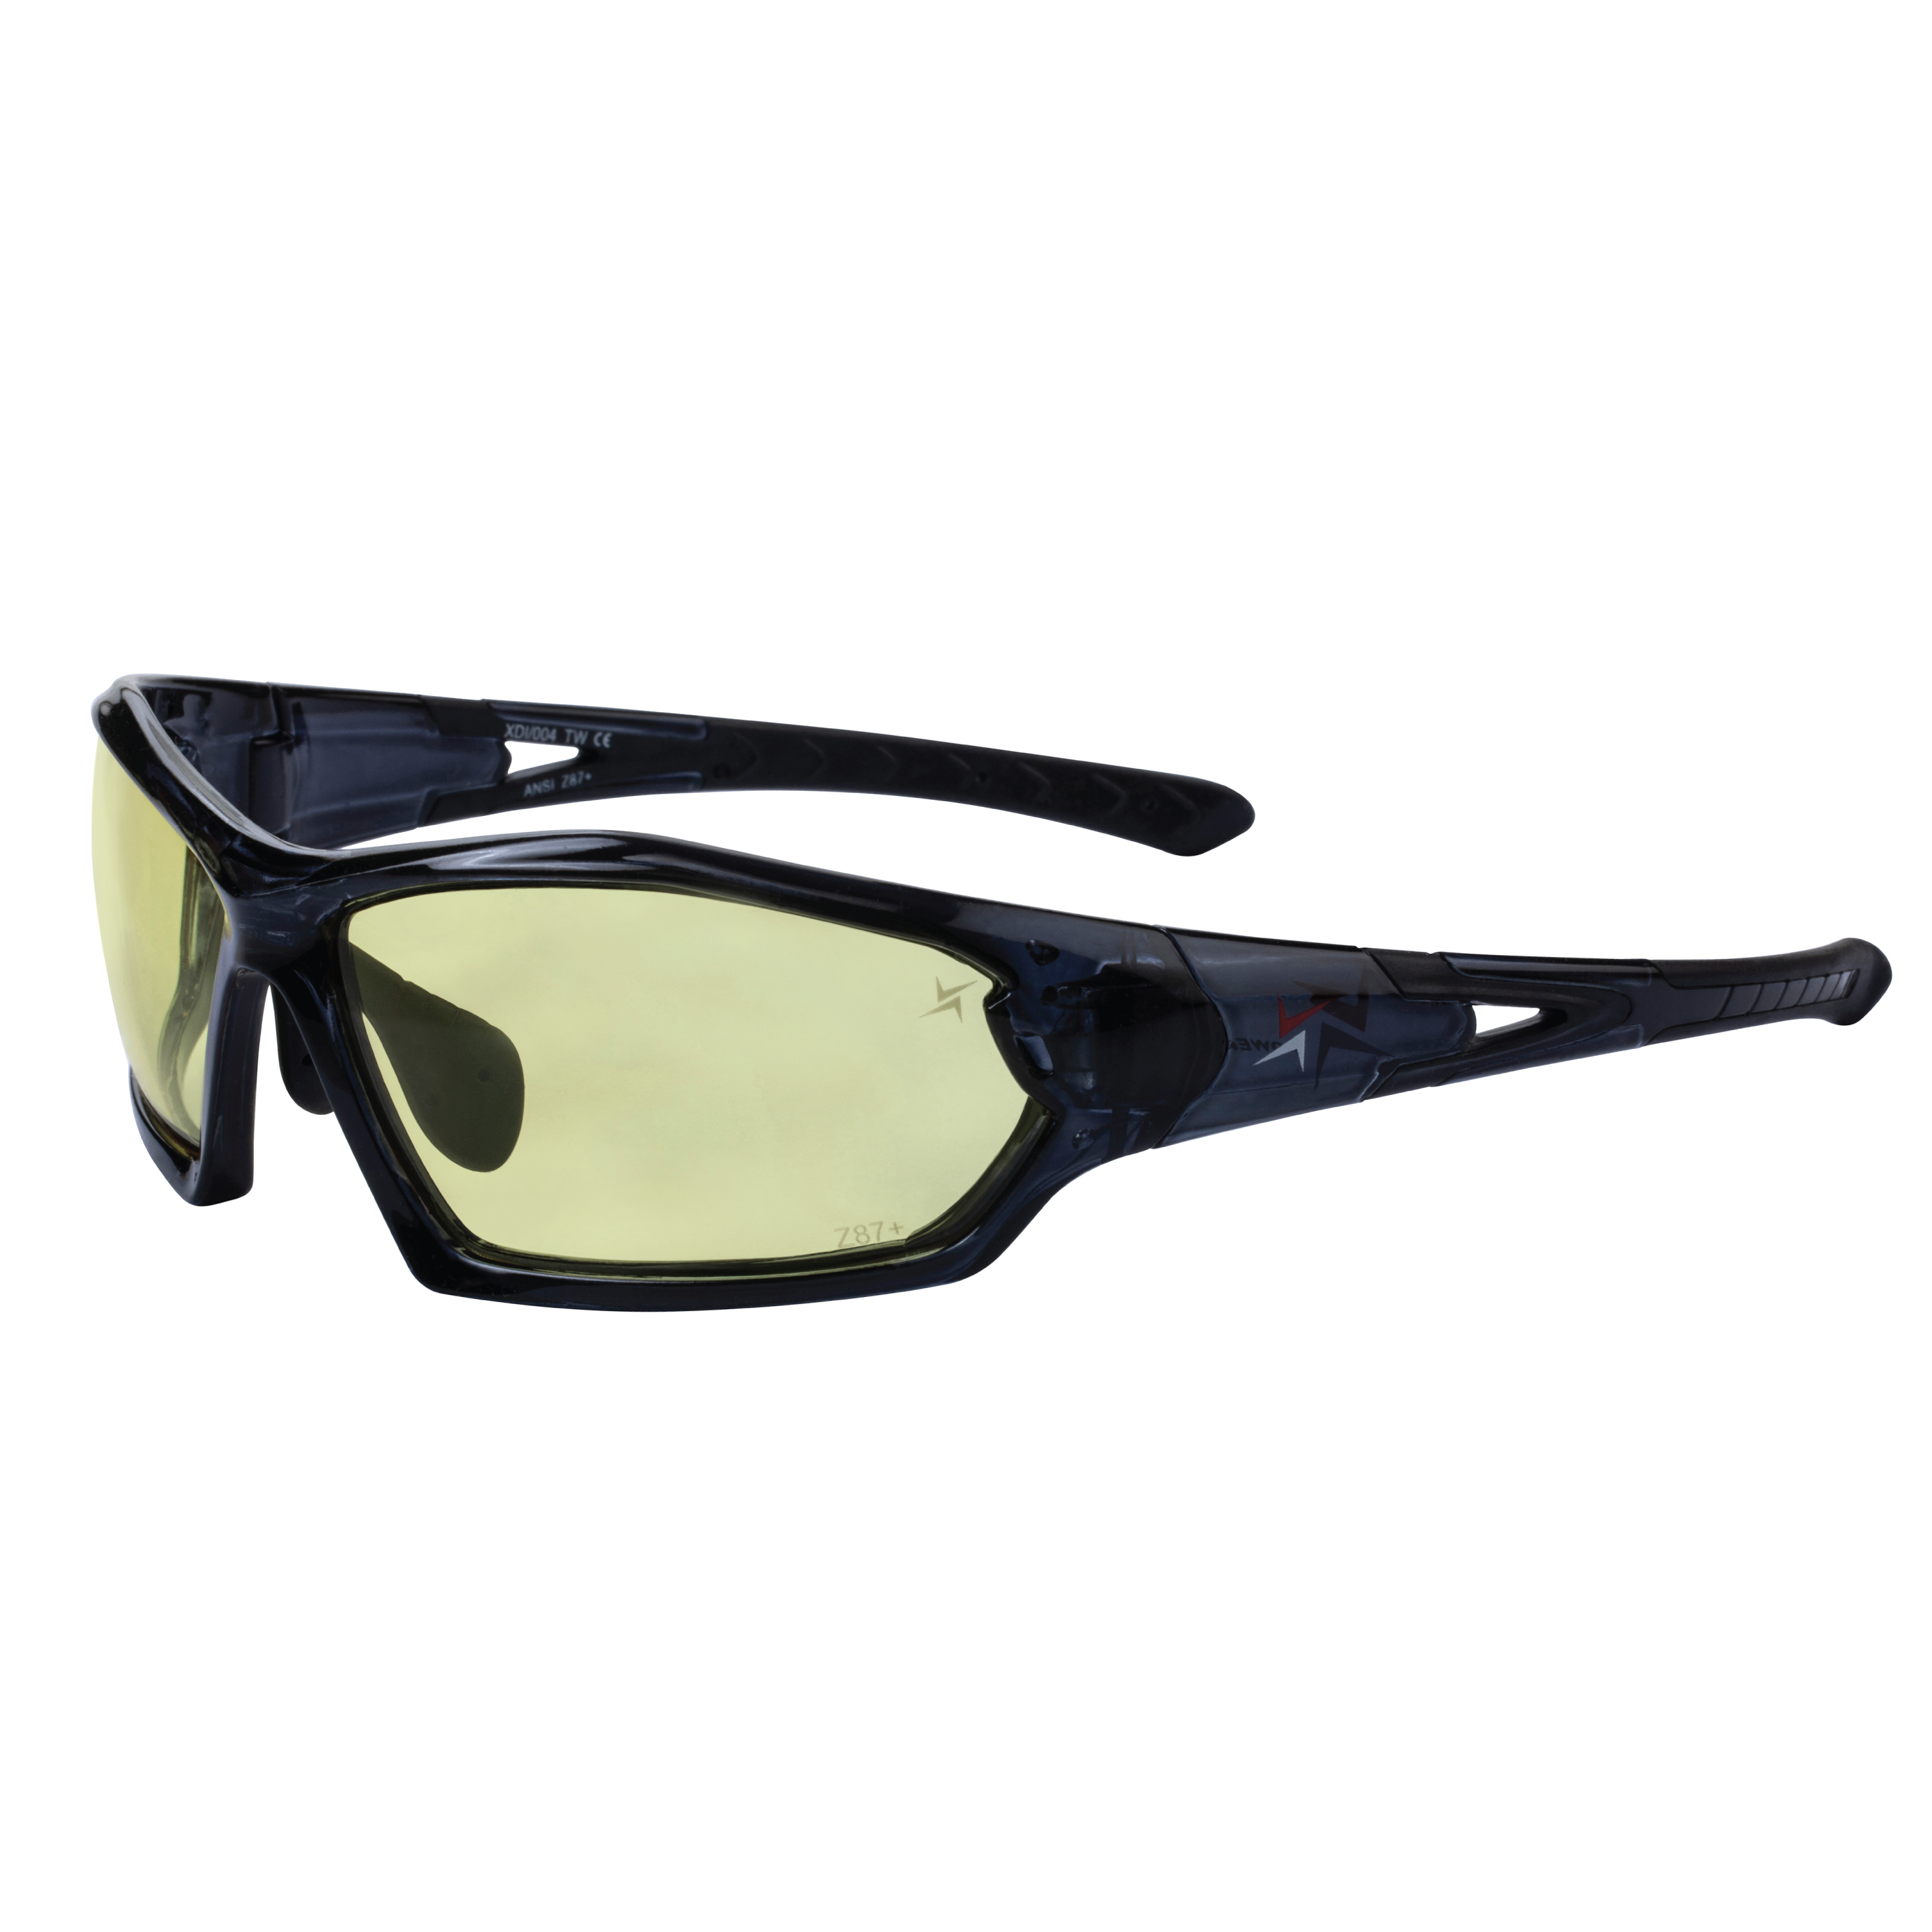 Yellow tinted Lens Translucent Frame Sport Safety Sunglasses with Adjustable Nose Pads.